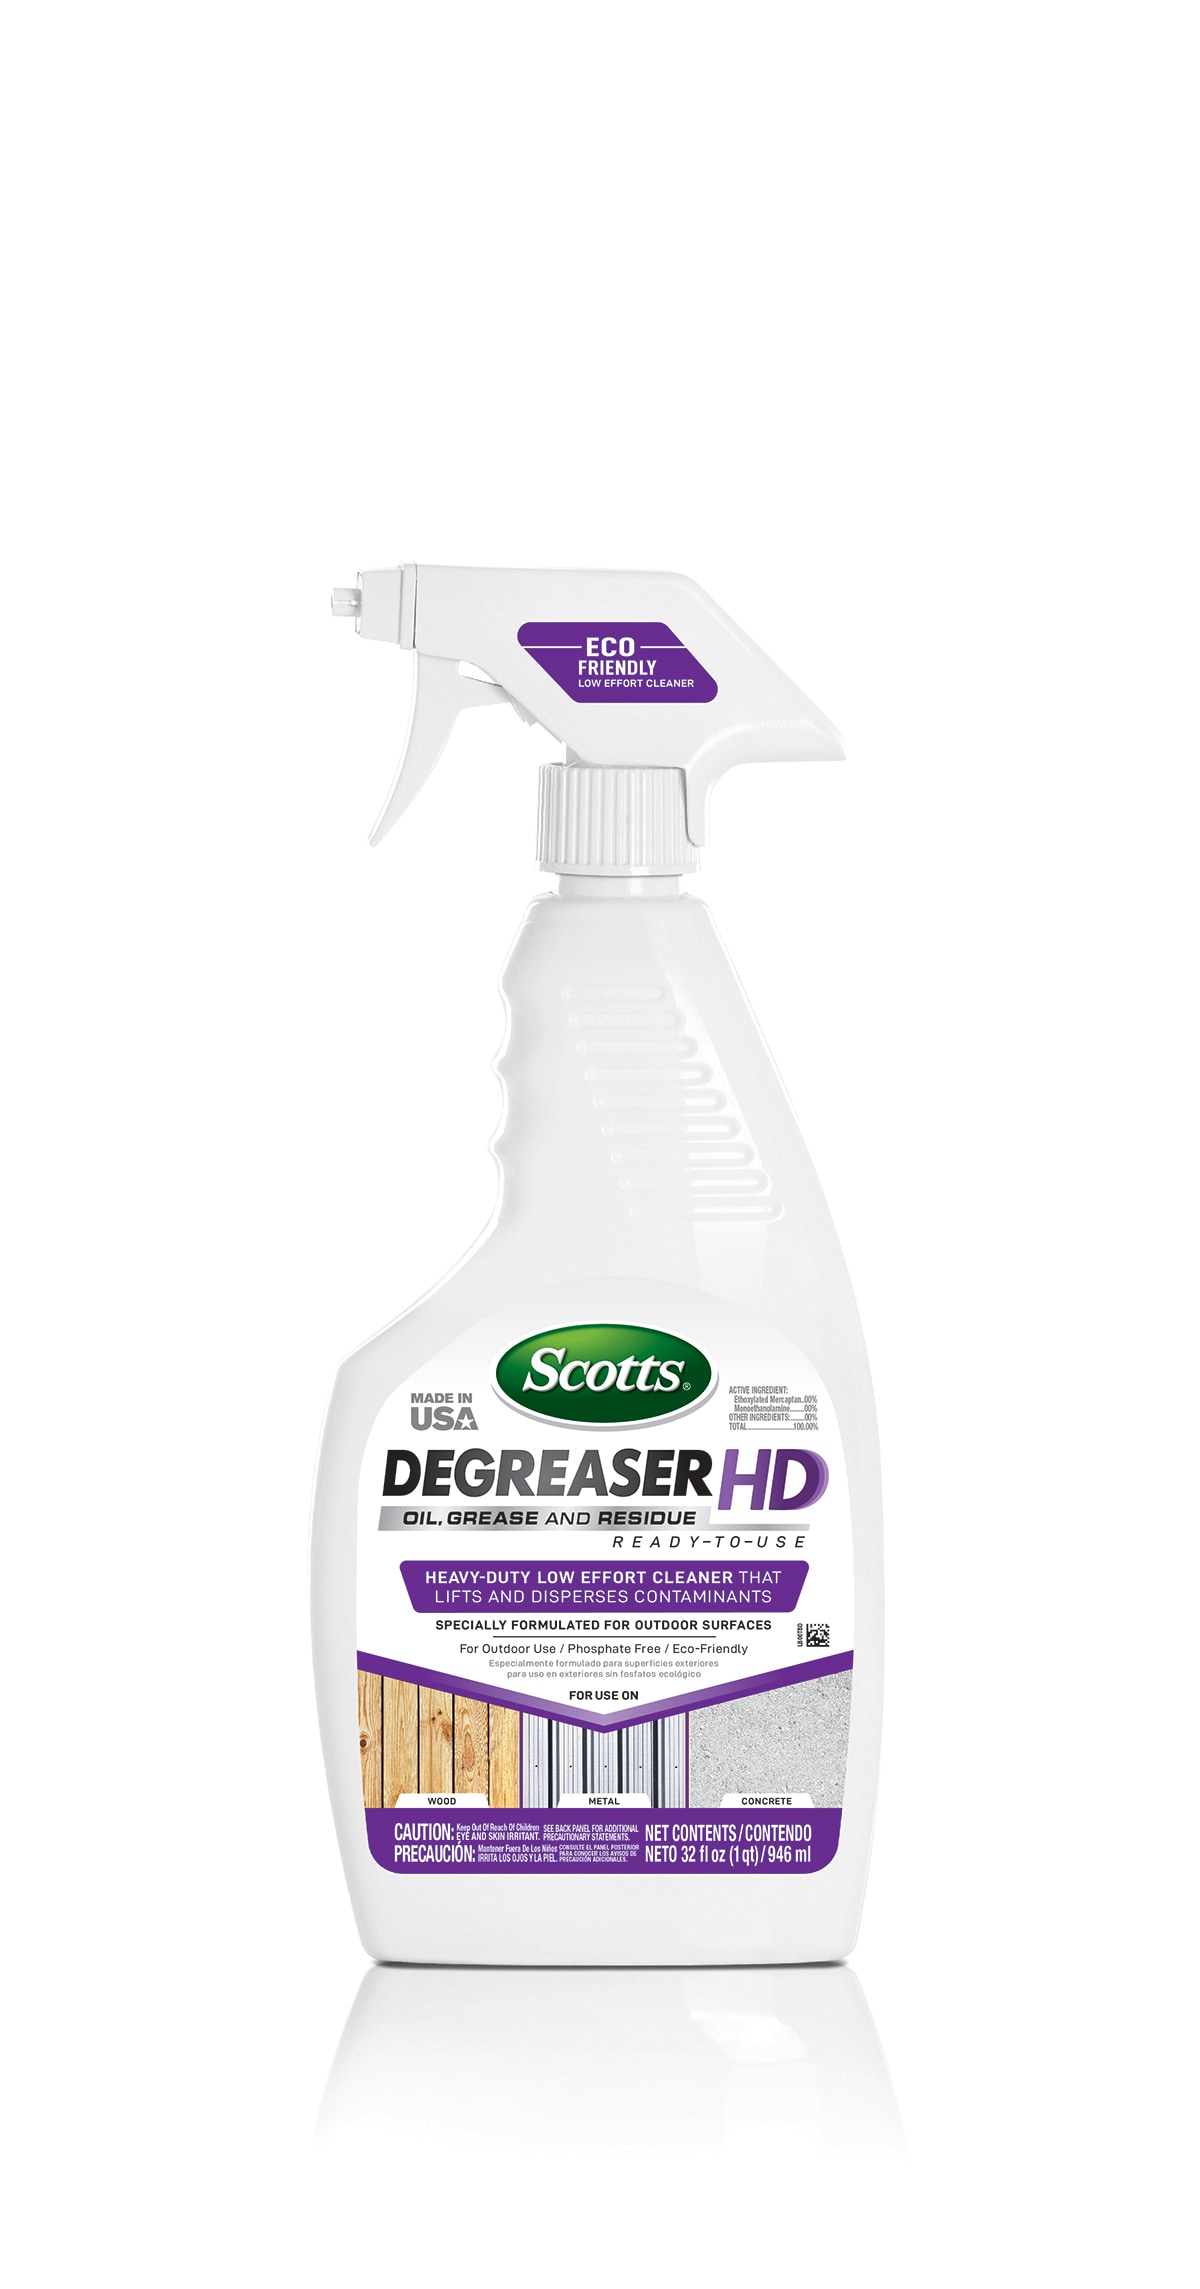 CONCRETEREADY® CONCENTRATED CLEANER DEGREASER - H&C® Concrete